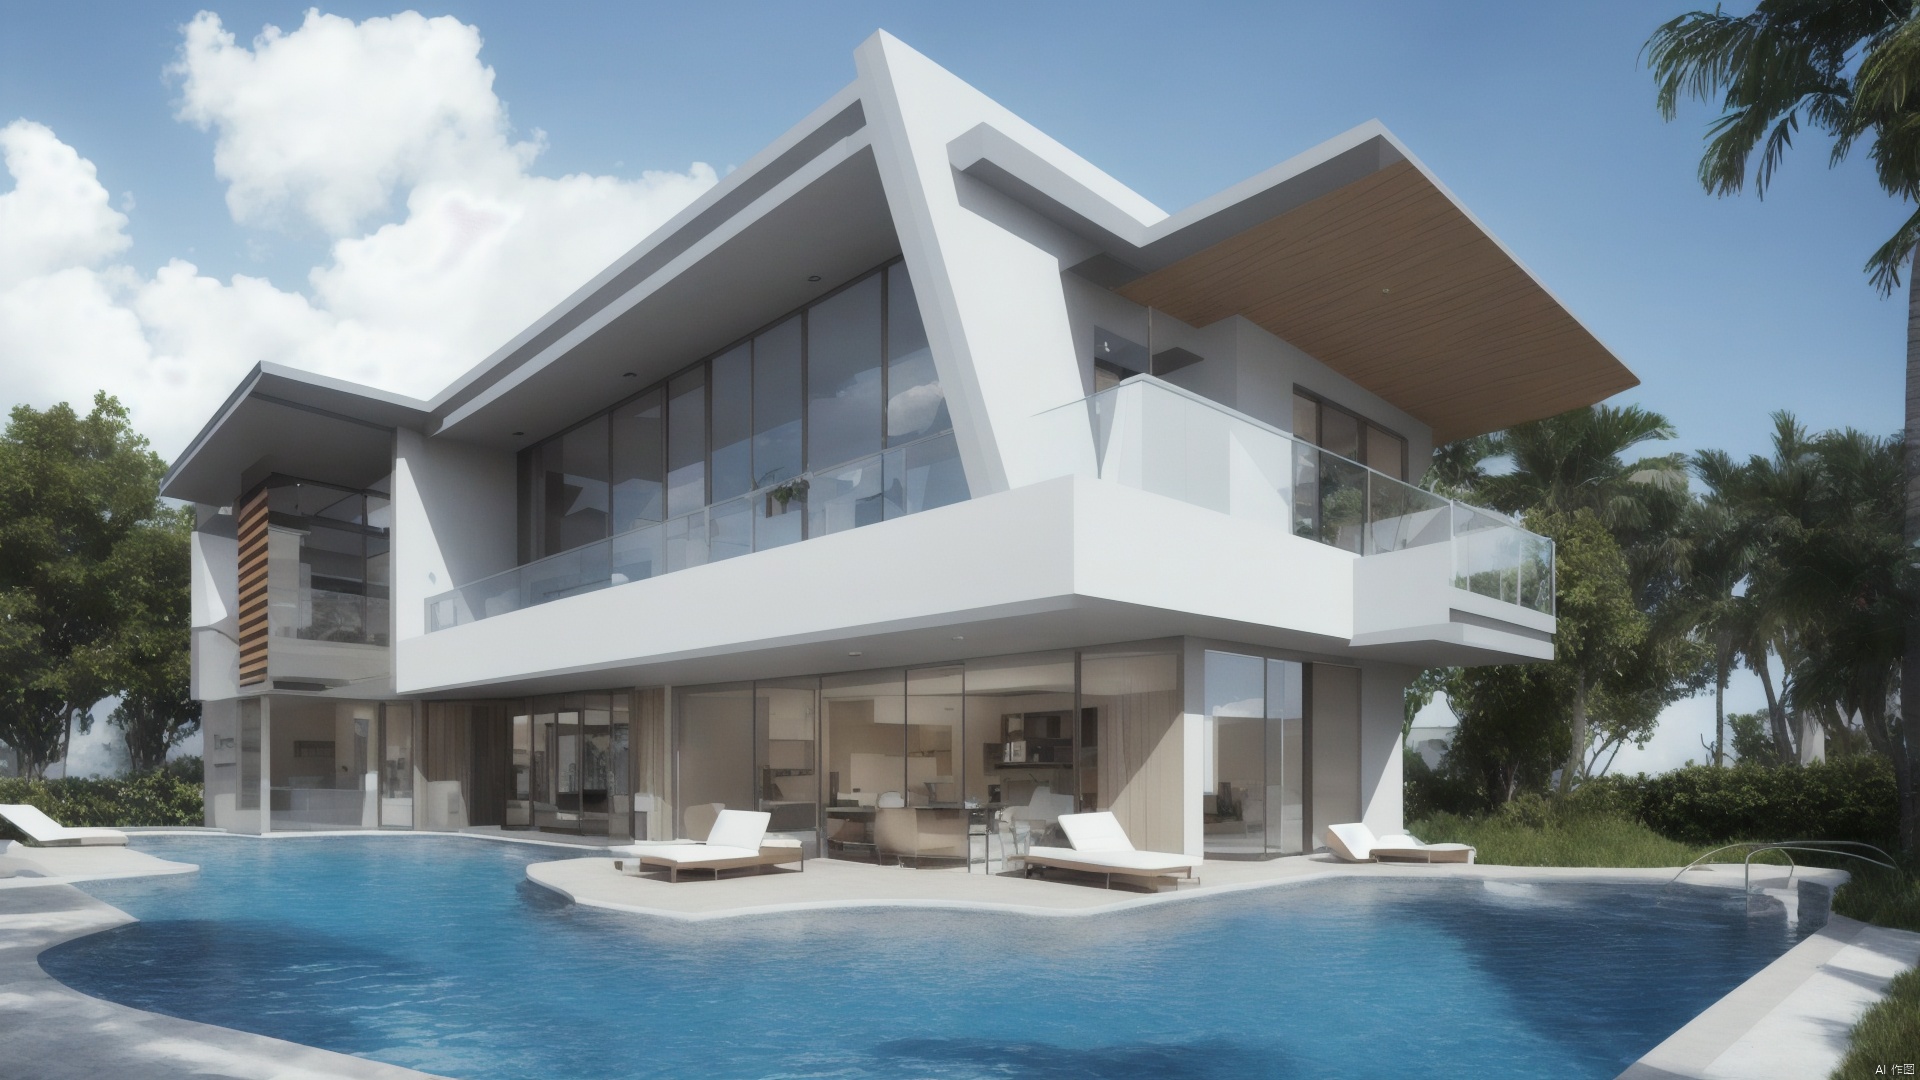  Glass Villa,, 
Outdoor,
Beach,
Modern decoration style,
The entire building uses a single piece of glass,
Glass balcony,
Swimming pool,
Realistic style,
Architectural renderings,


Representative,boutique, Masterpiece, Intricate, 
High Quality, Best Quality, 
4K, 8K,Ultra HD,high res, absurd res,
Full Detail,Exquisite Detail, Super Detail, intricate details,
, SDXL